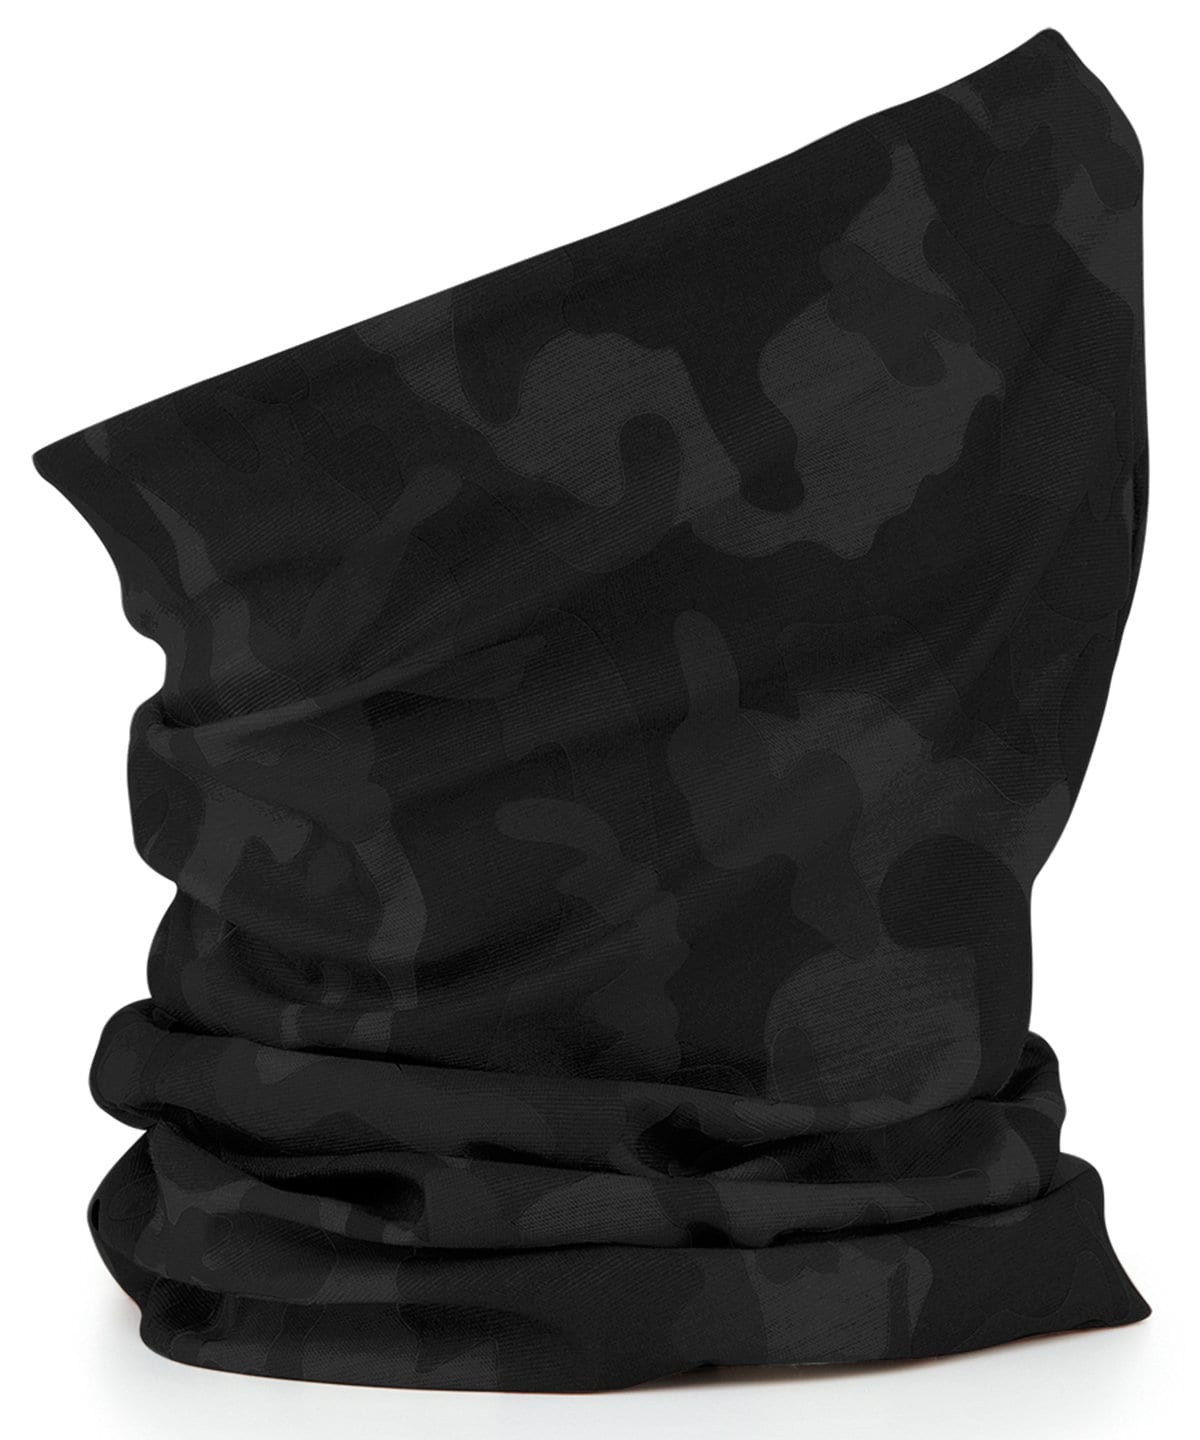 Morf Camouflage Snood BC900 Face and Neck Covering Jungle Midnight Arctic | Neck Tube | Scarf | Buff